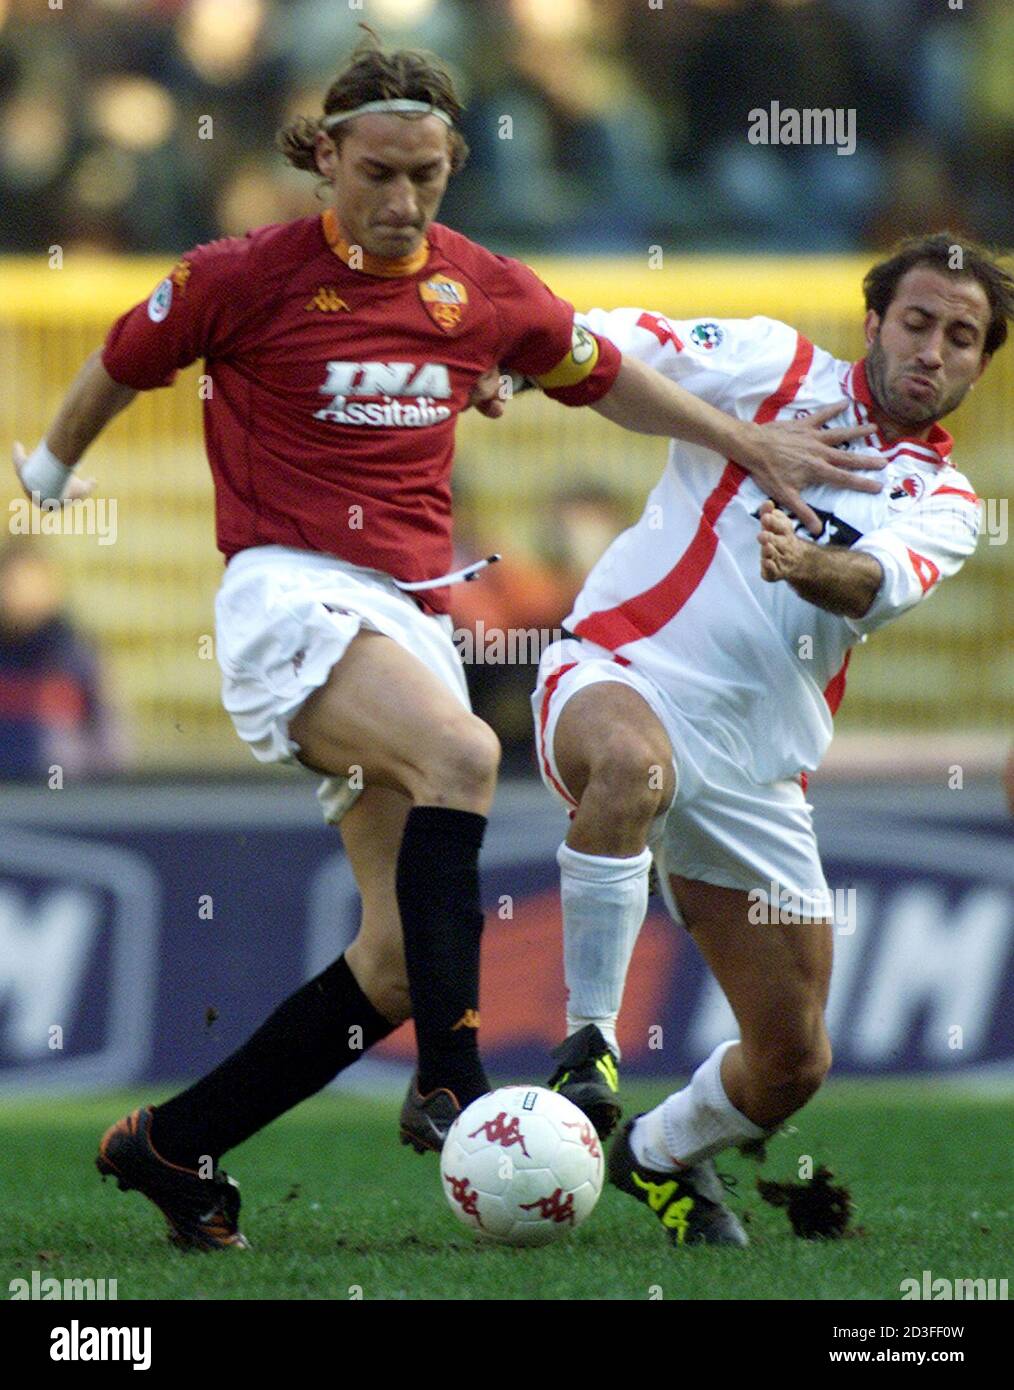 Page 5 - As Roma 2001 High Resolution Stock Photography and Images - Alamy